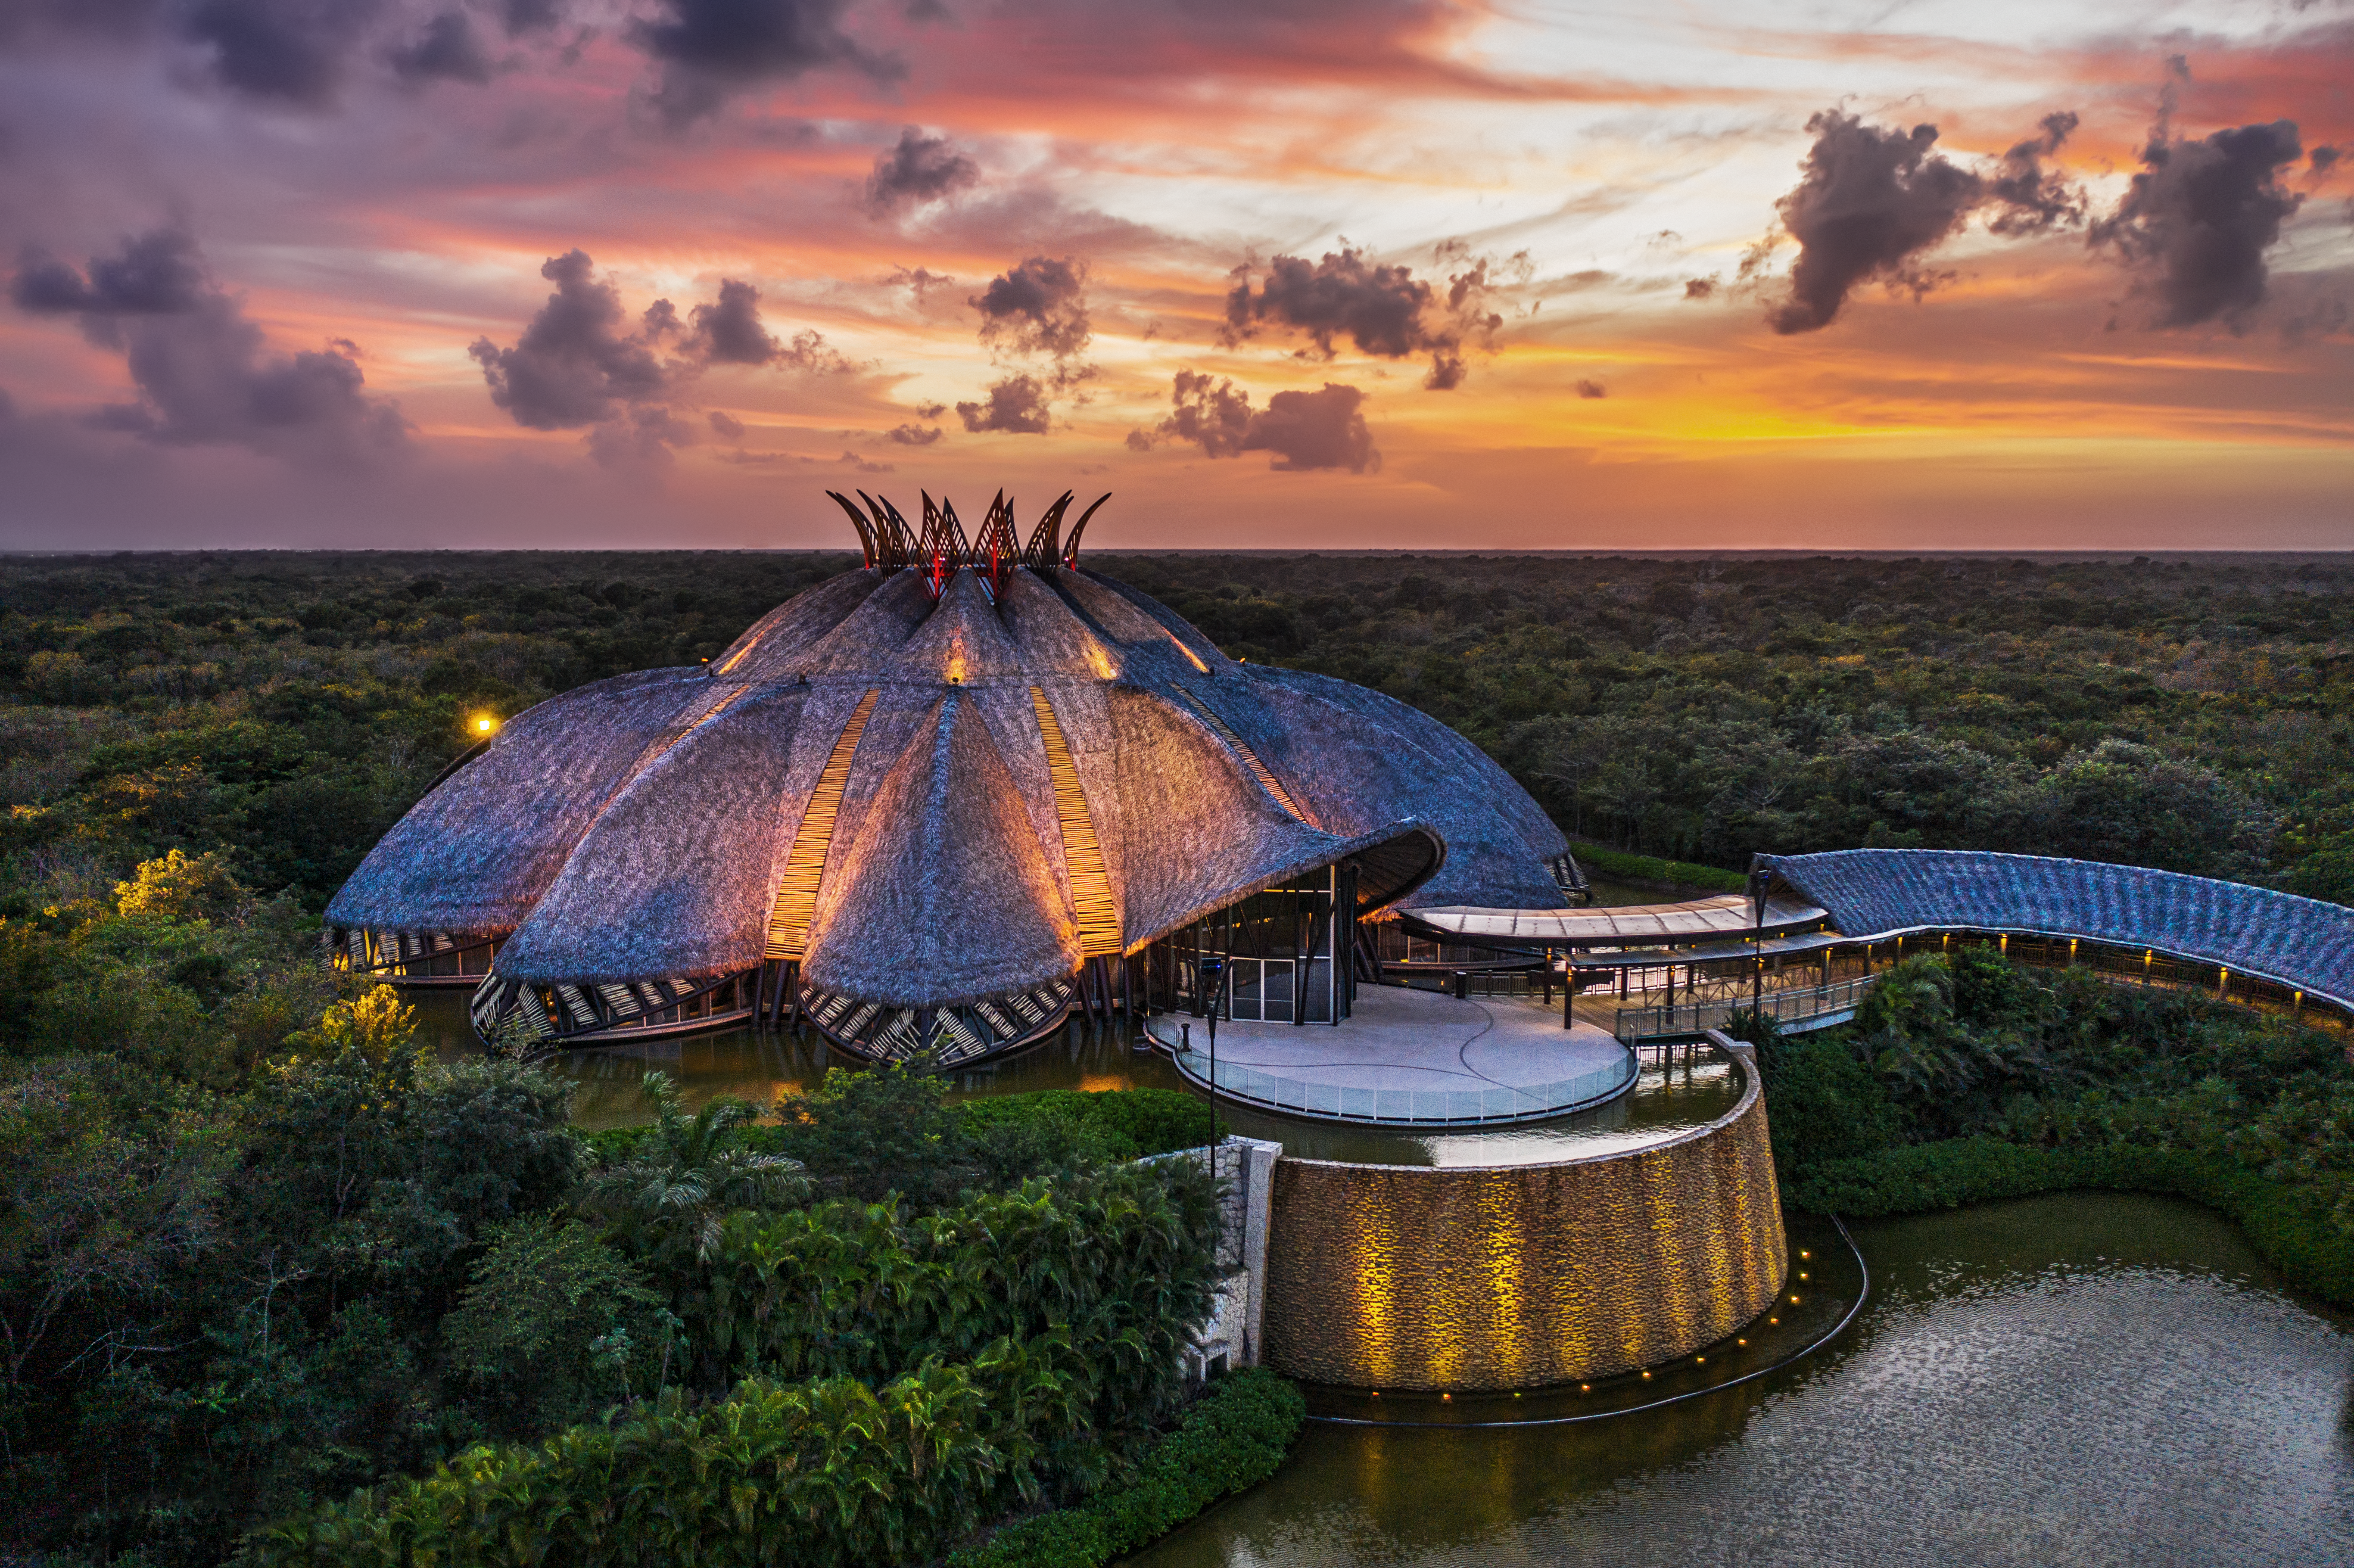 JOYÀ, the first resident Cirque du Soleil show in Latin America, will celebrate its 10th anniversary this November